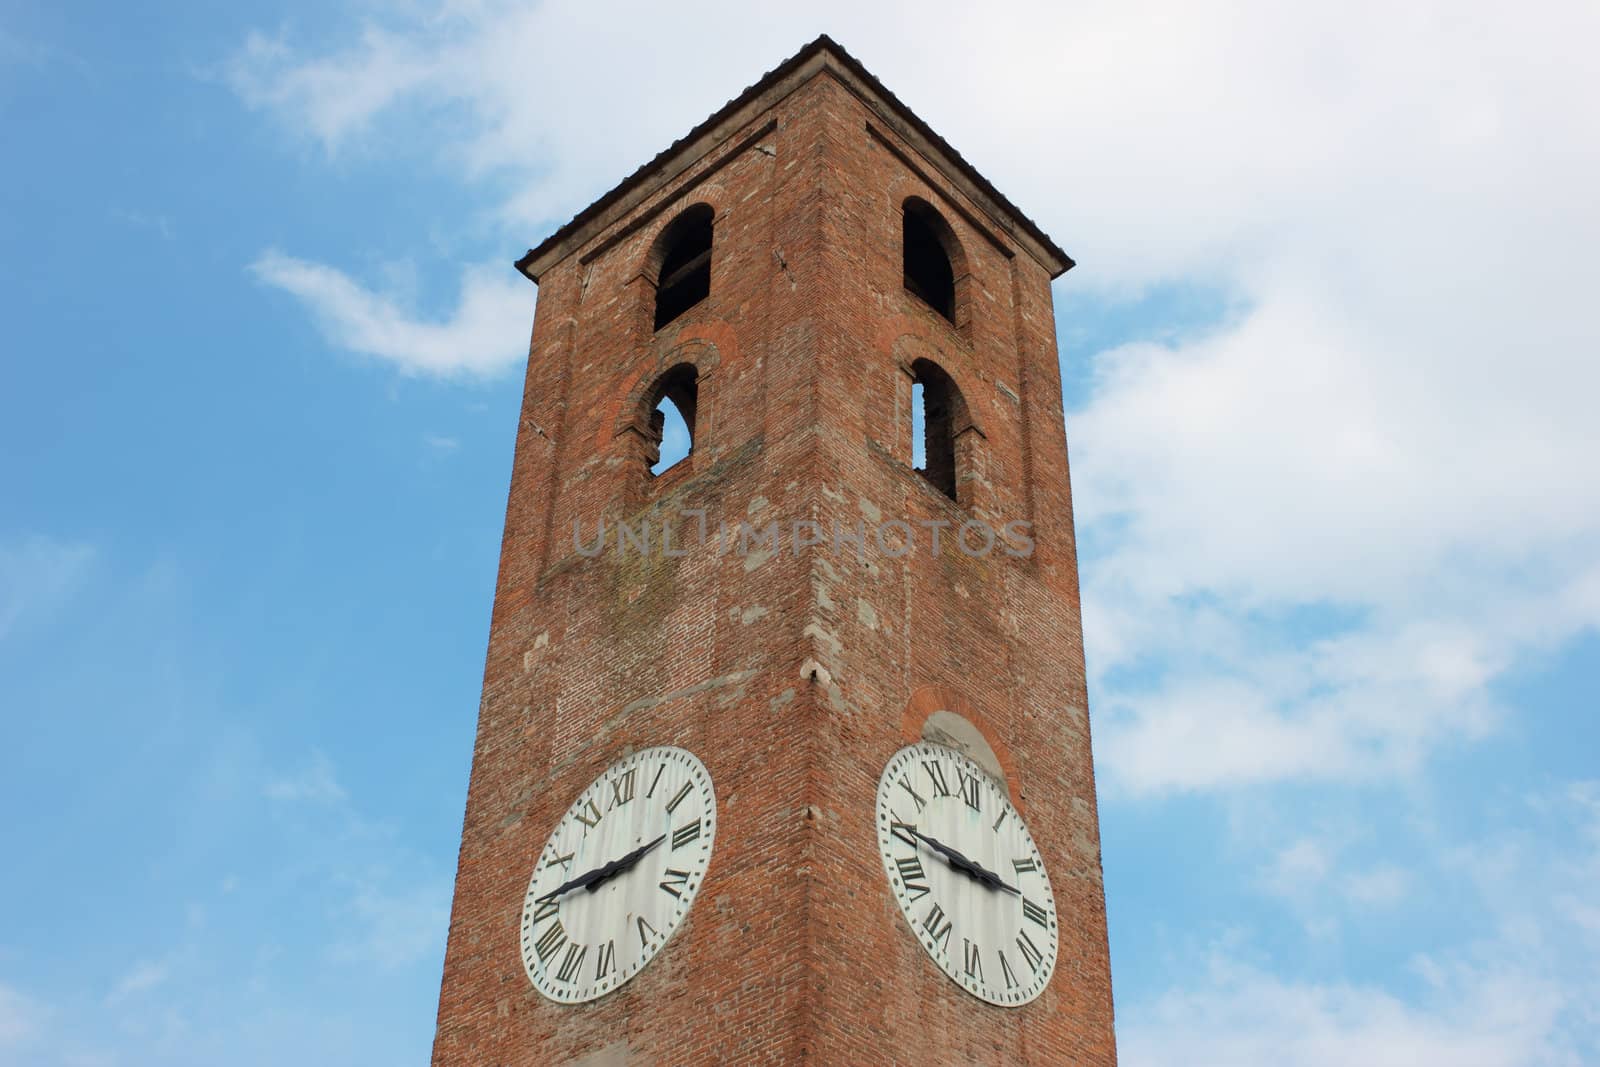 Antique clock tower in Lucca, Italy on blue sky background with white clouds.